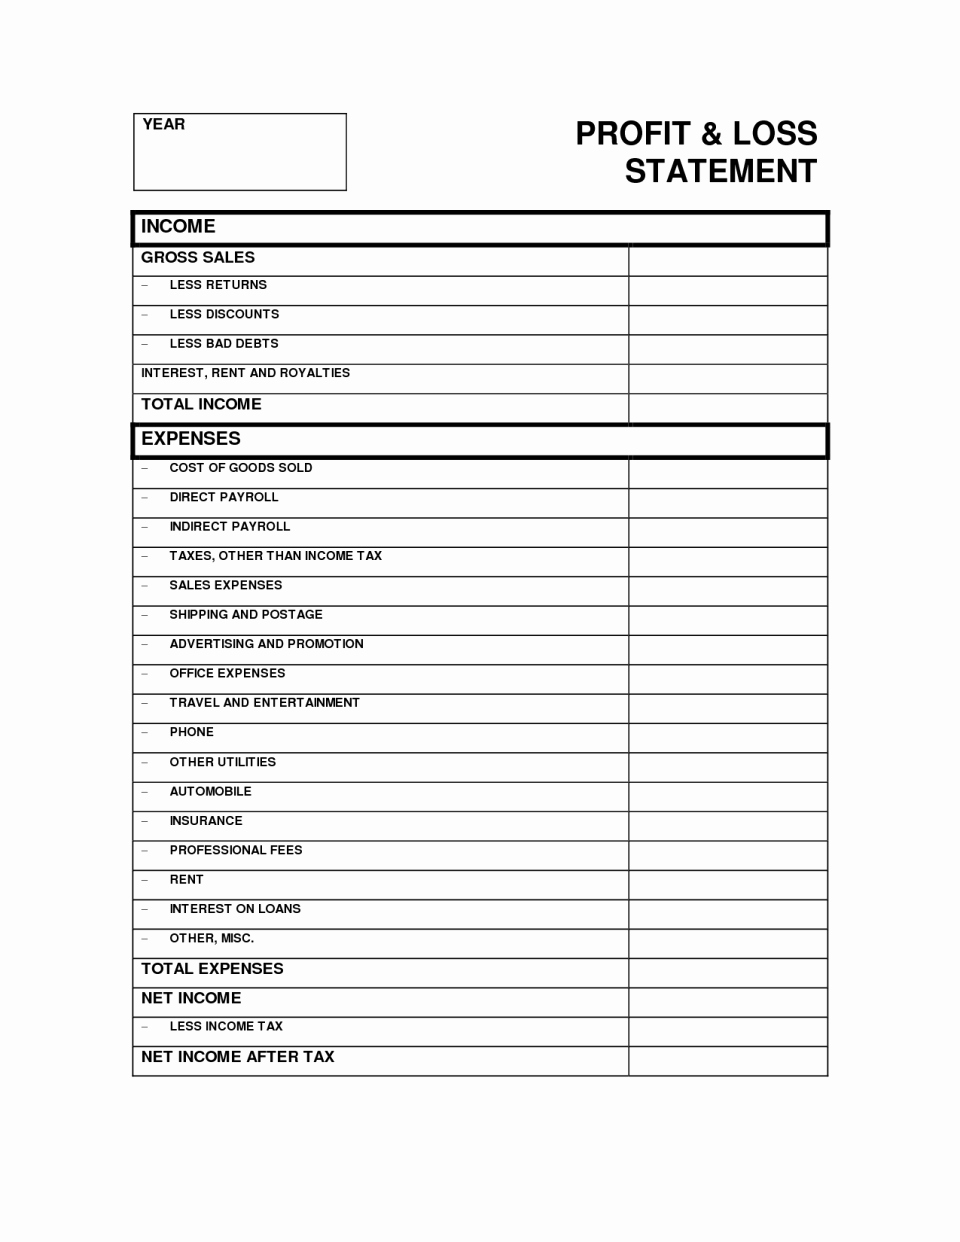 Personal Profit and Loss Template Inspirational Profit and Loss Statement Template Free